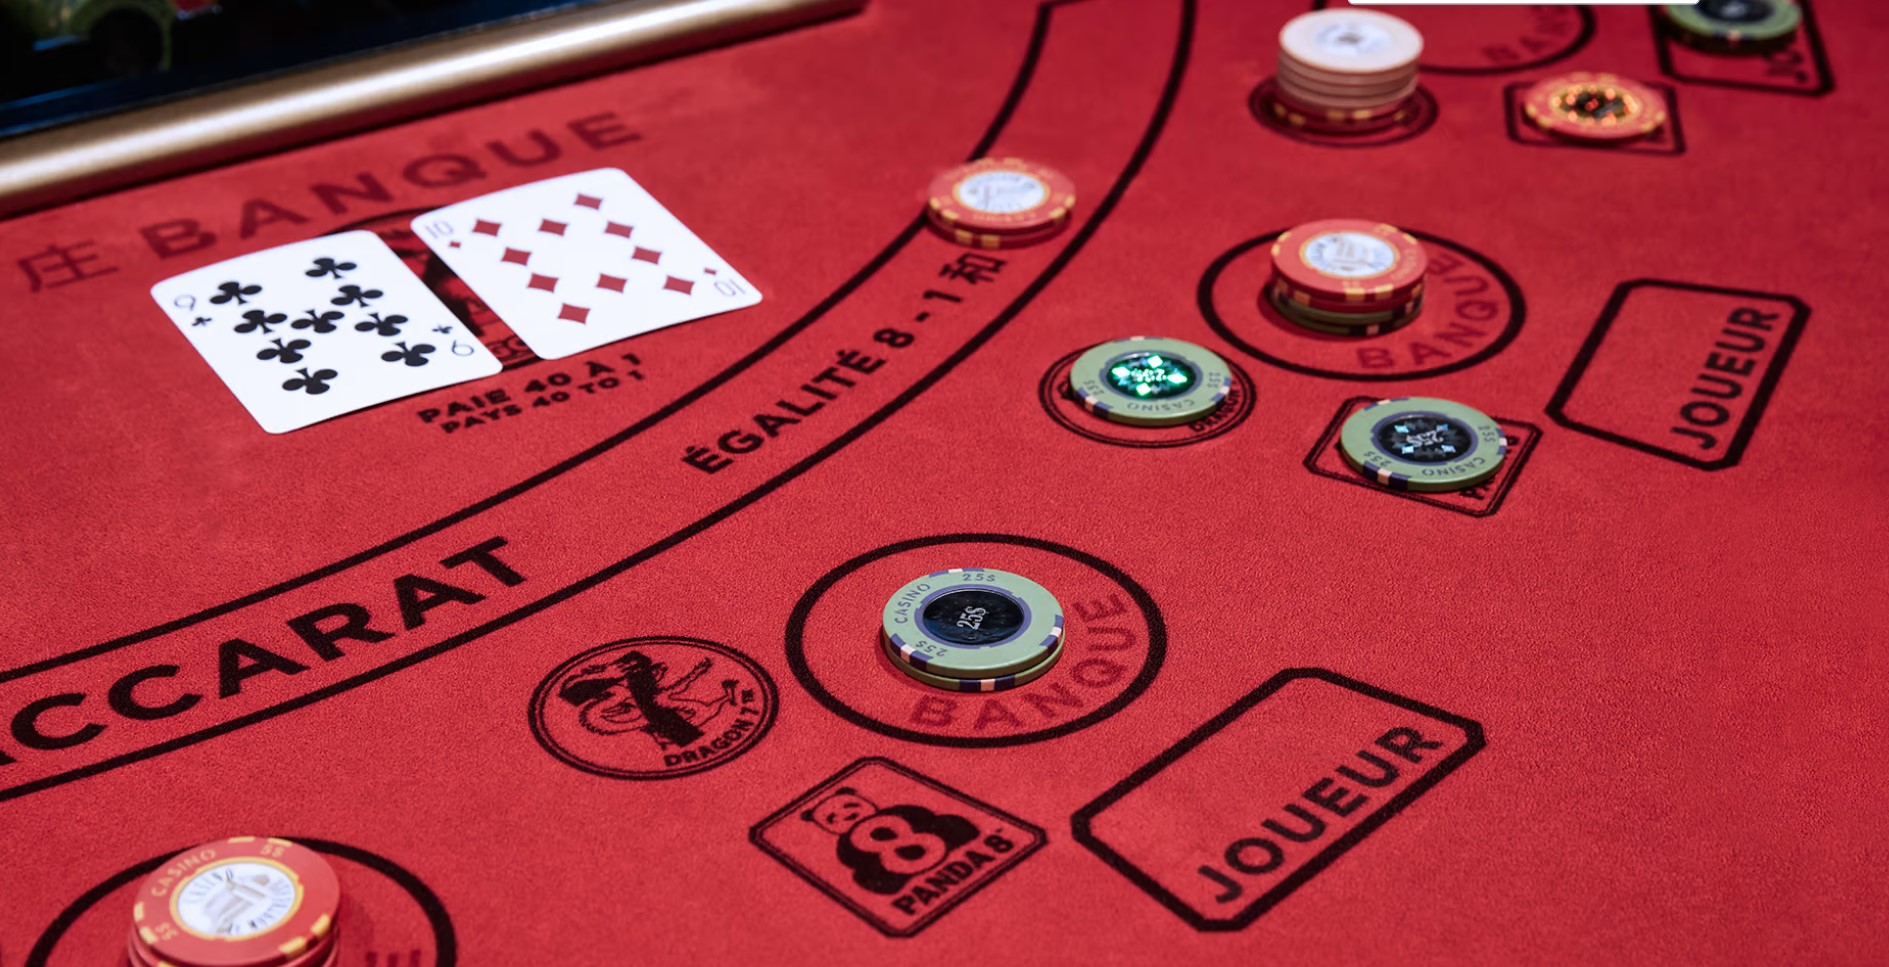 Types of baccarat bets and how they work